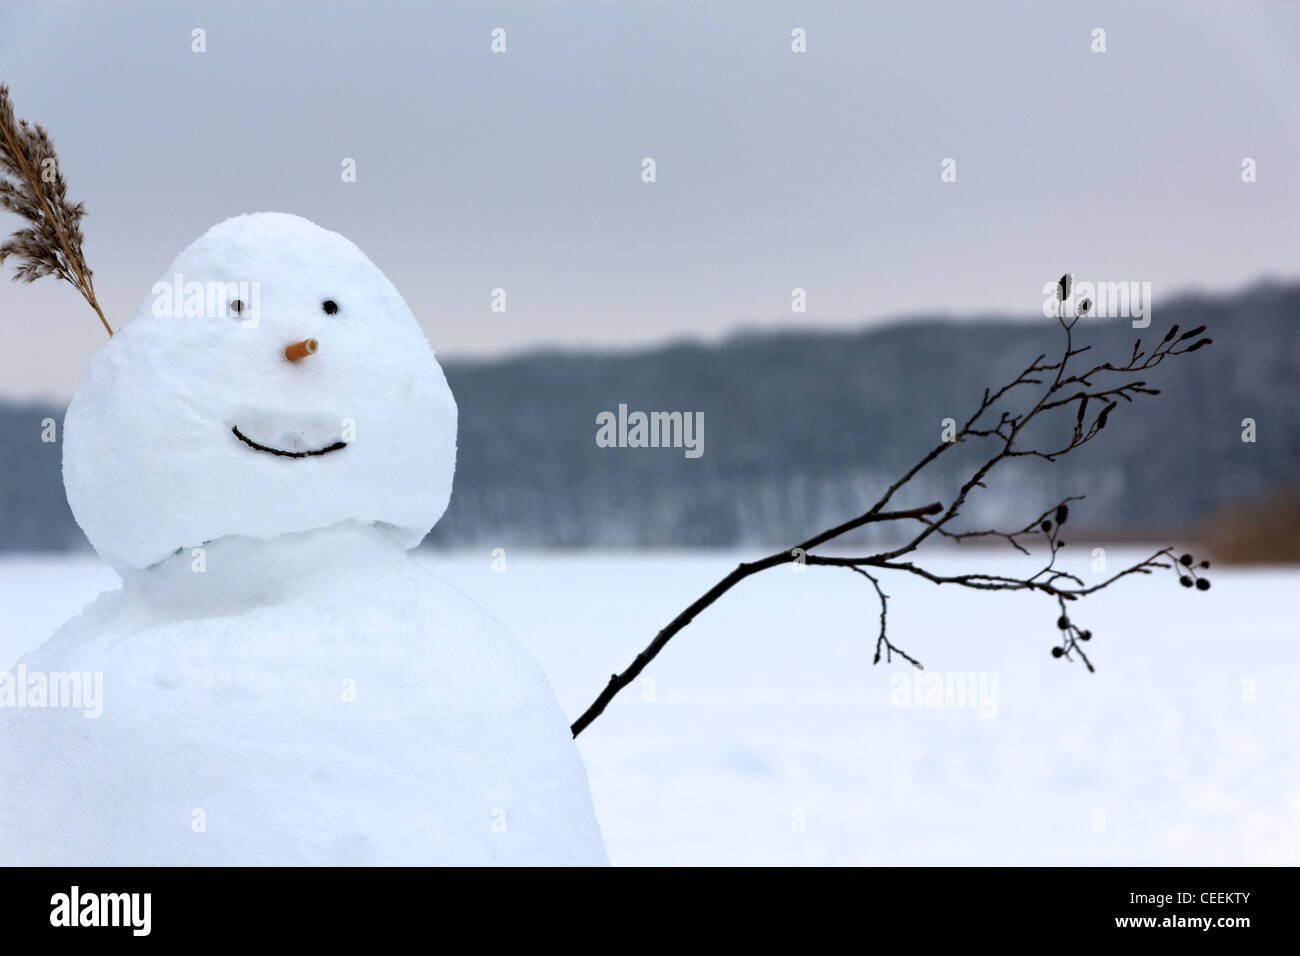 A smiling happy snowman raises the twig it has for an arm in greeting before the background of a frozen lake and forest. Stock Photo